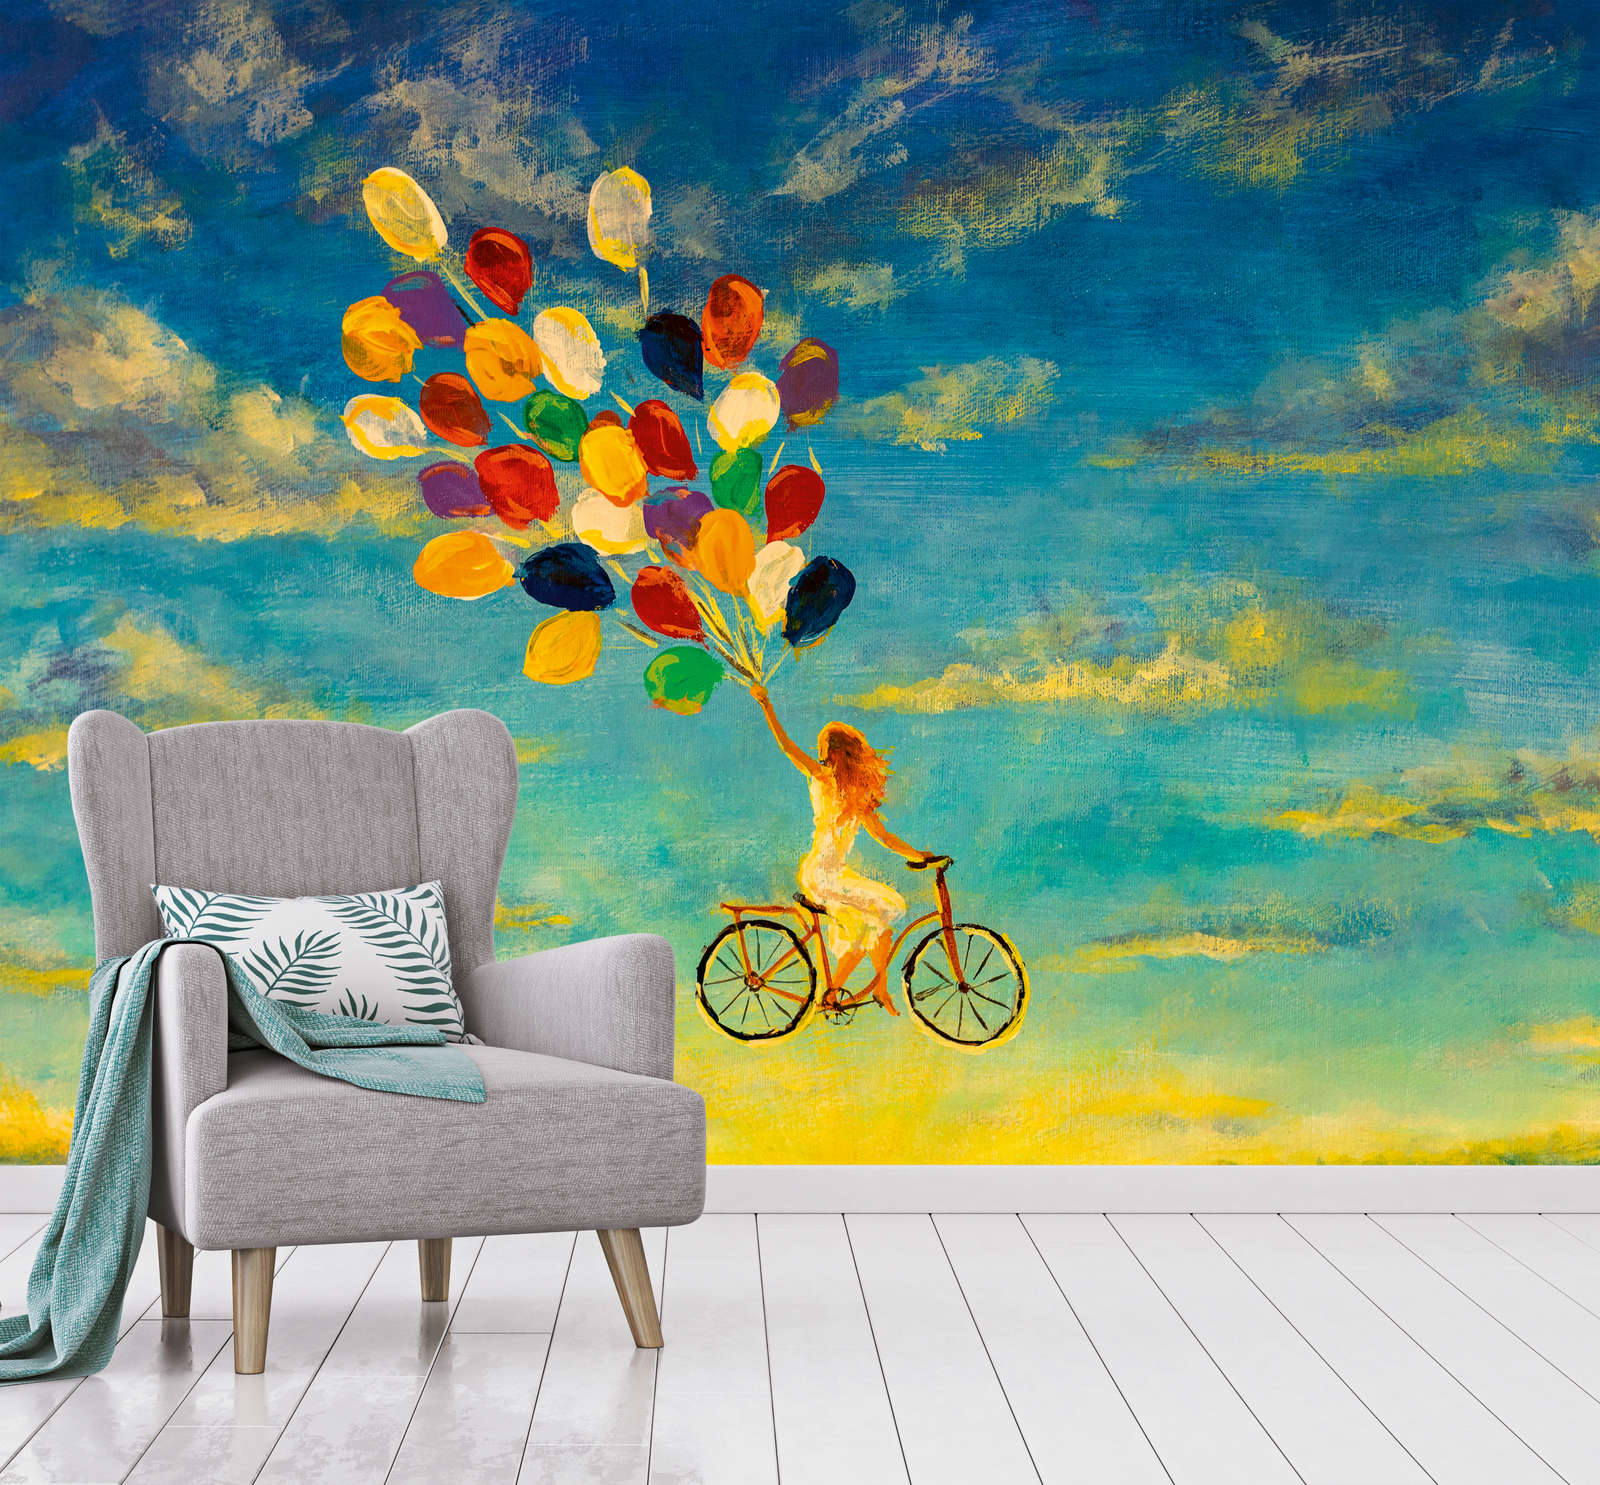             Photo wallpaper with Woman on Bicycle in the Sky Painting - Blue, Yellow, Colourful
        